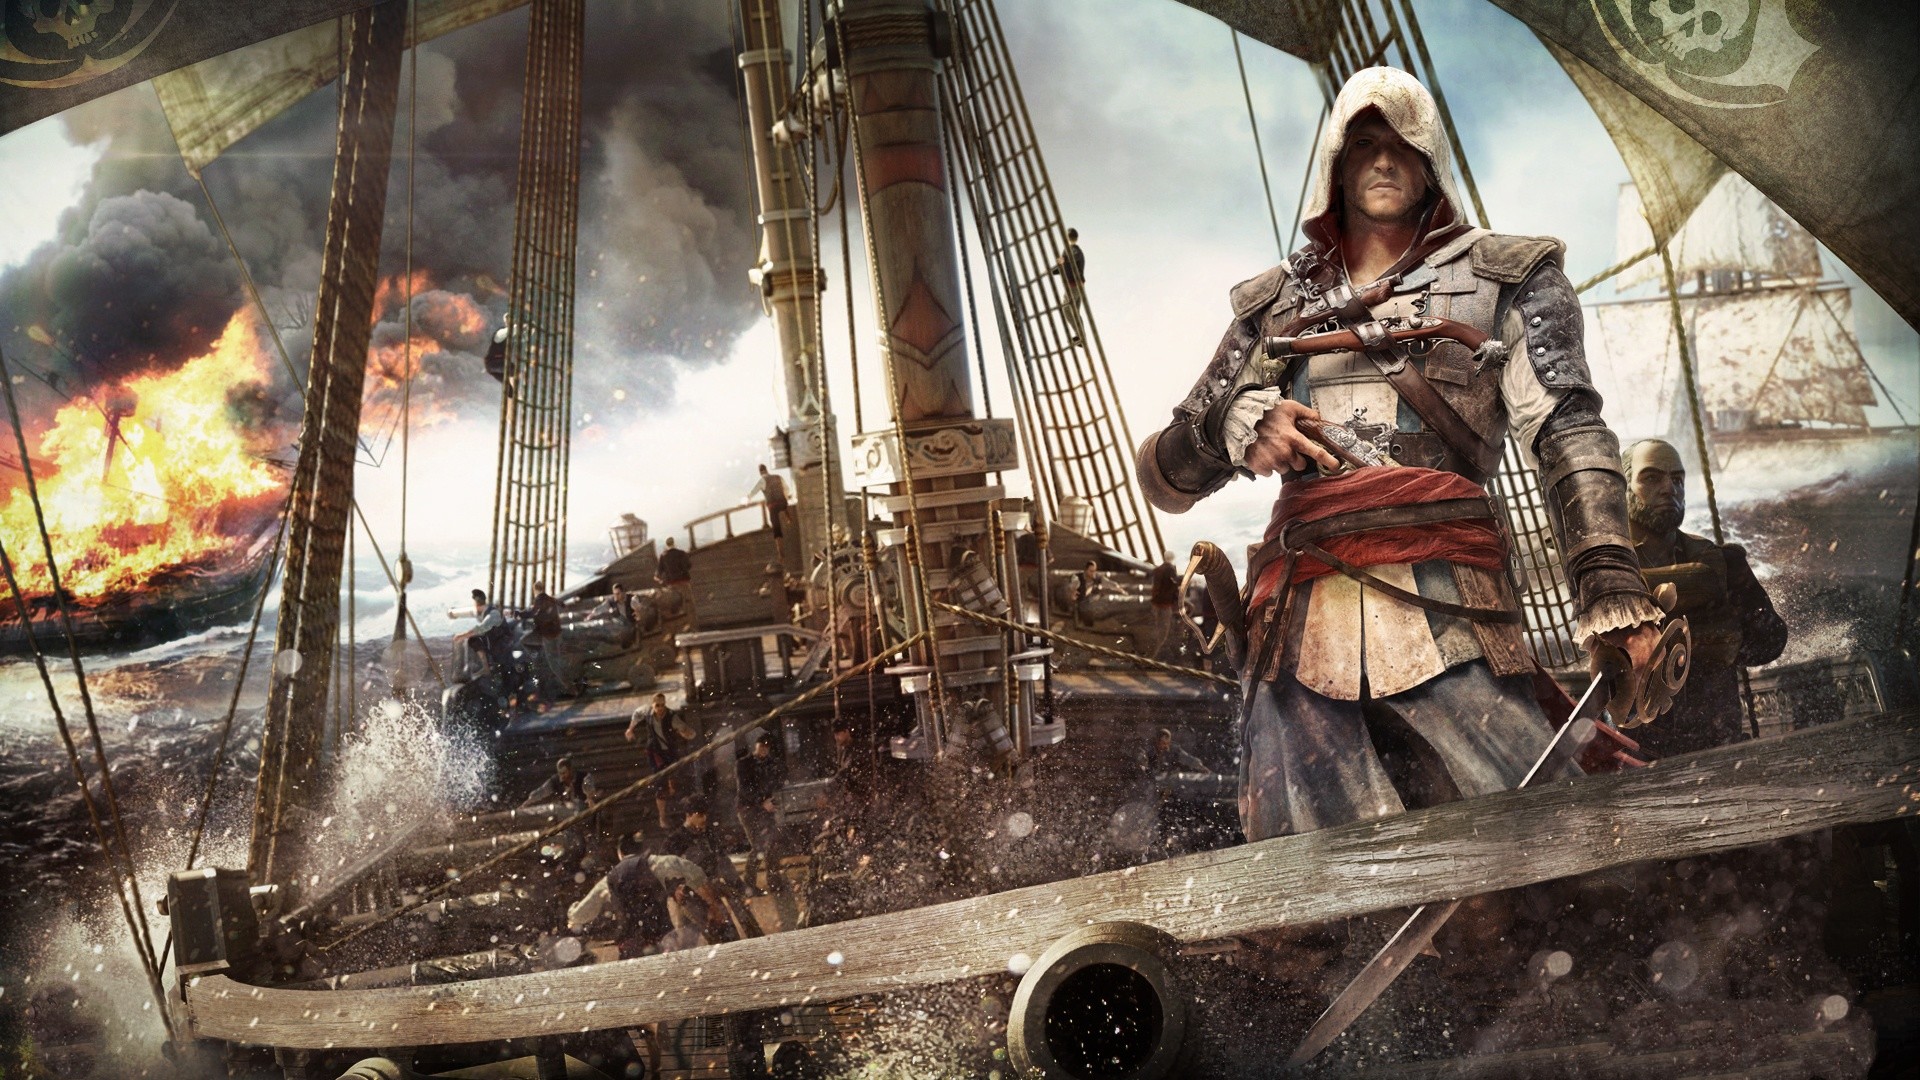 1920x1080 Assassin's Creed Black Flag Background Full HD.